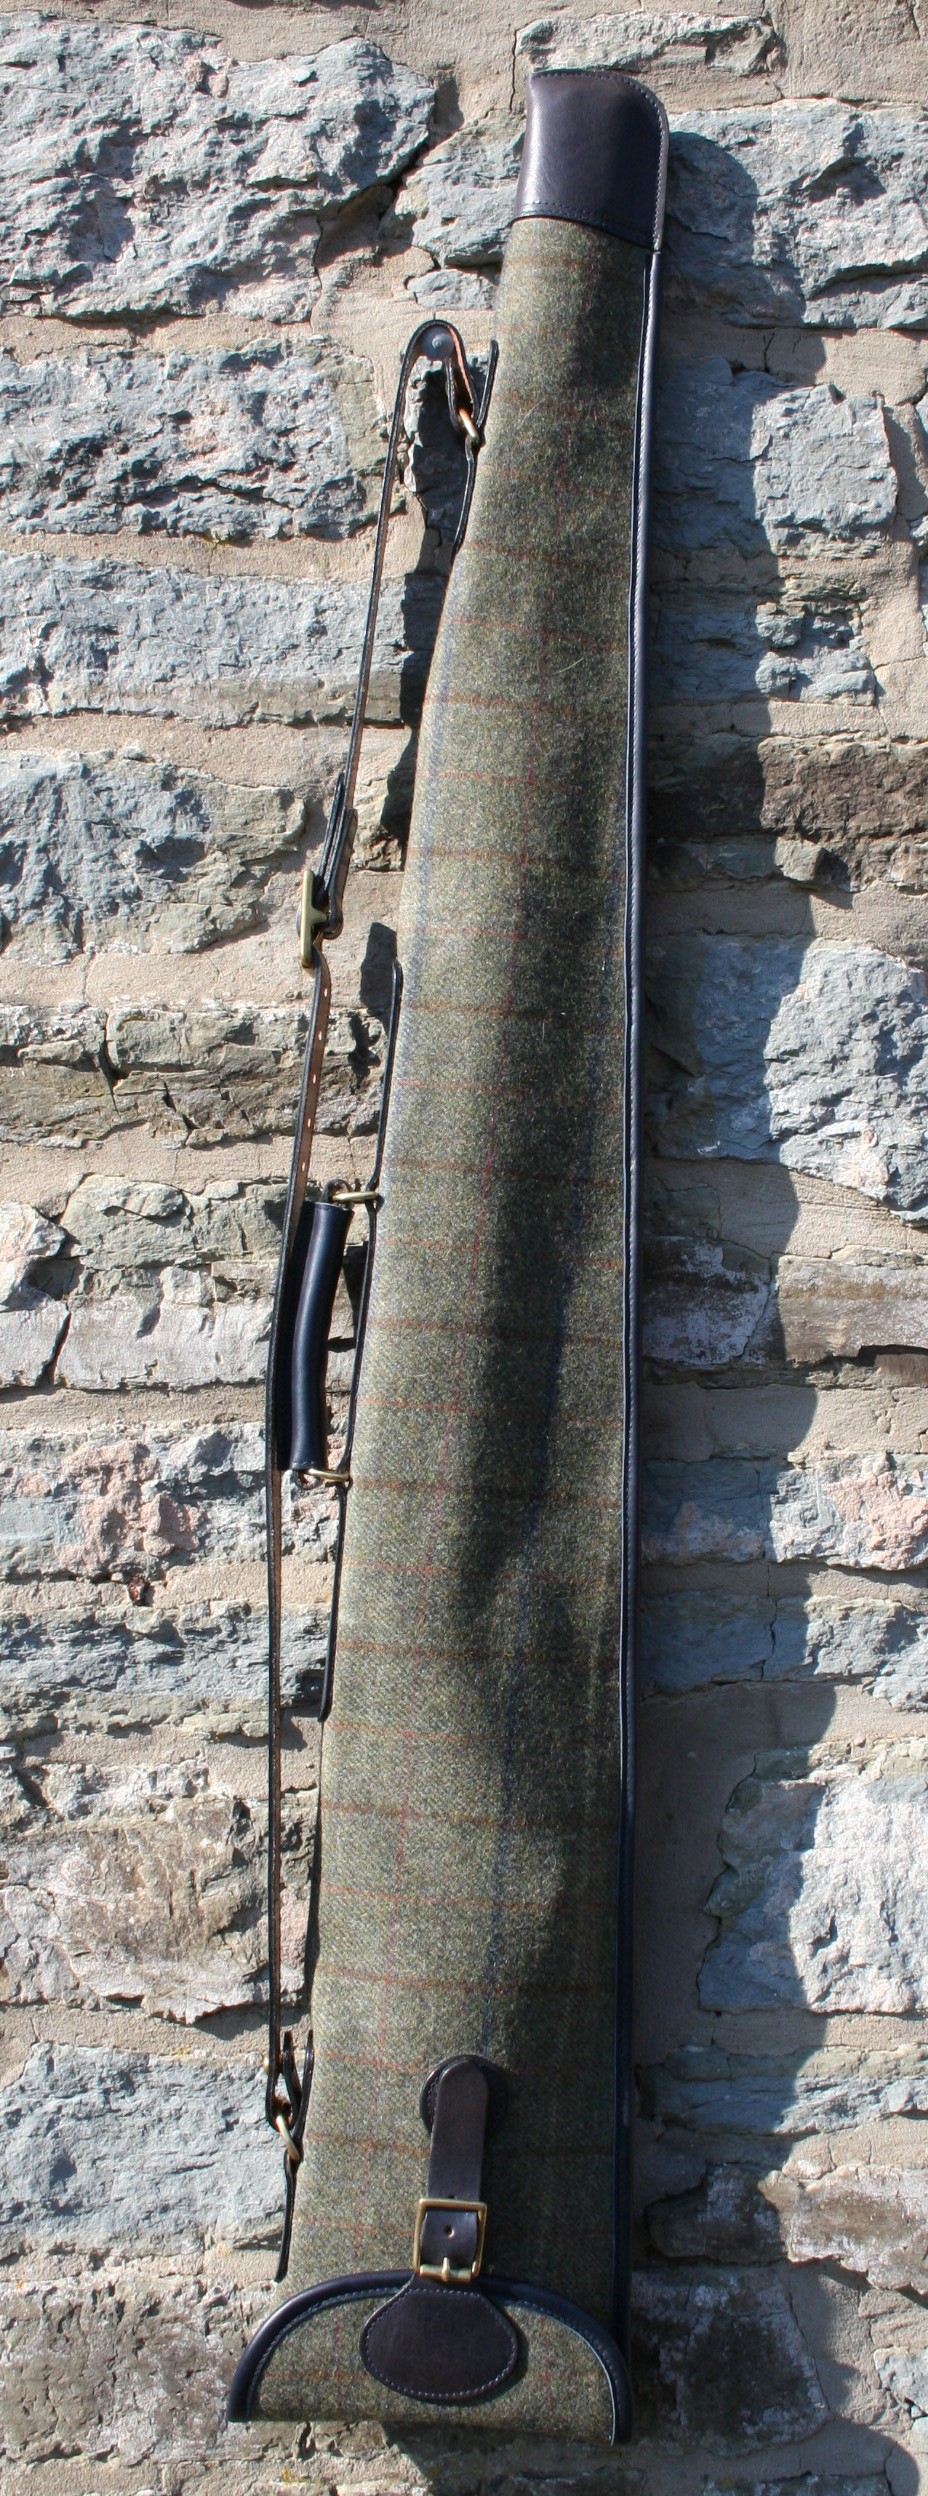 Clunton Tweed and Leather Gun Slip With Handle